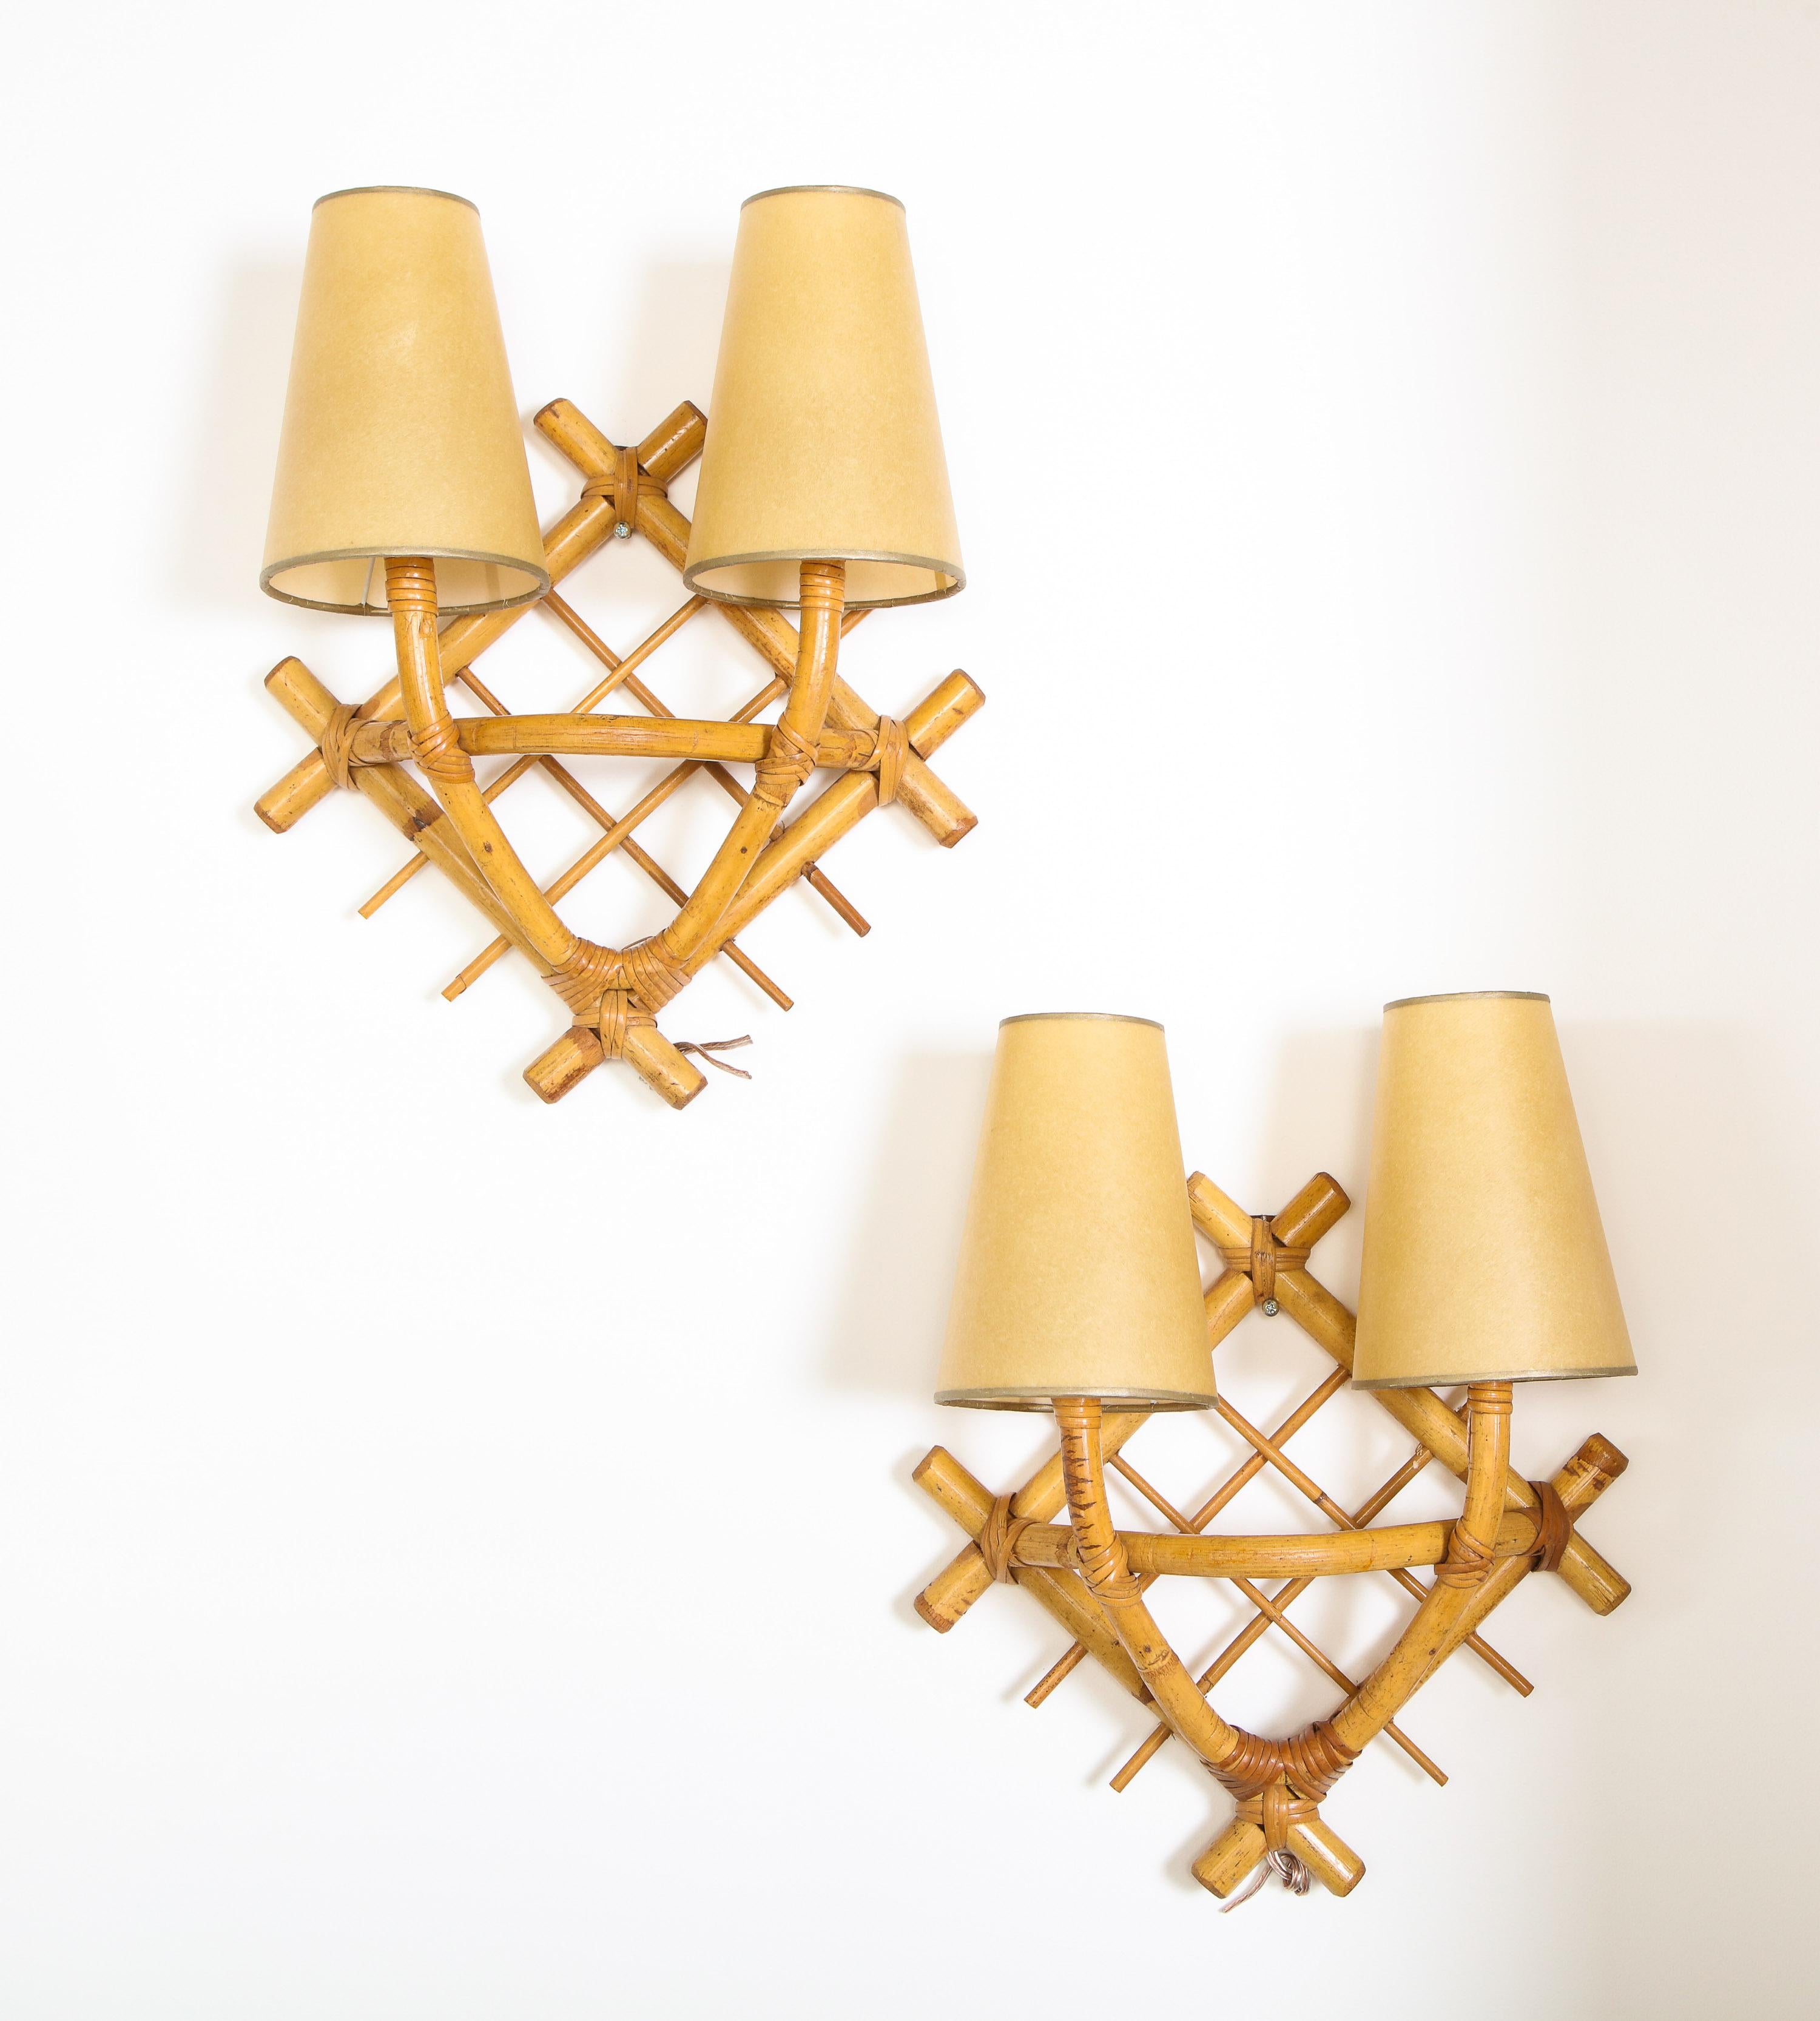 Pair of wicker sconces, France, 1950.